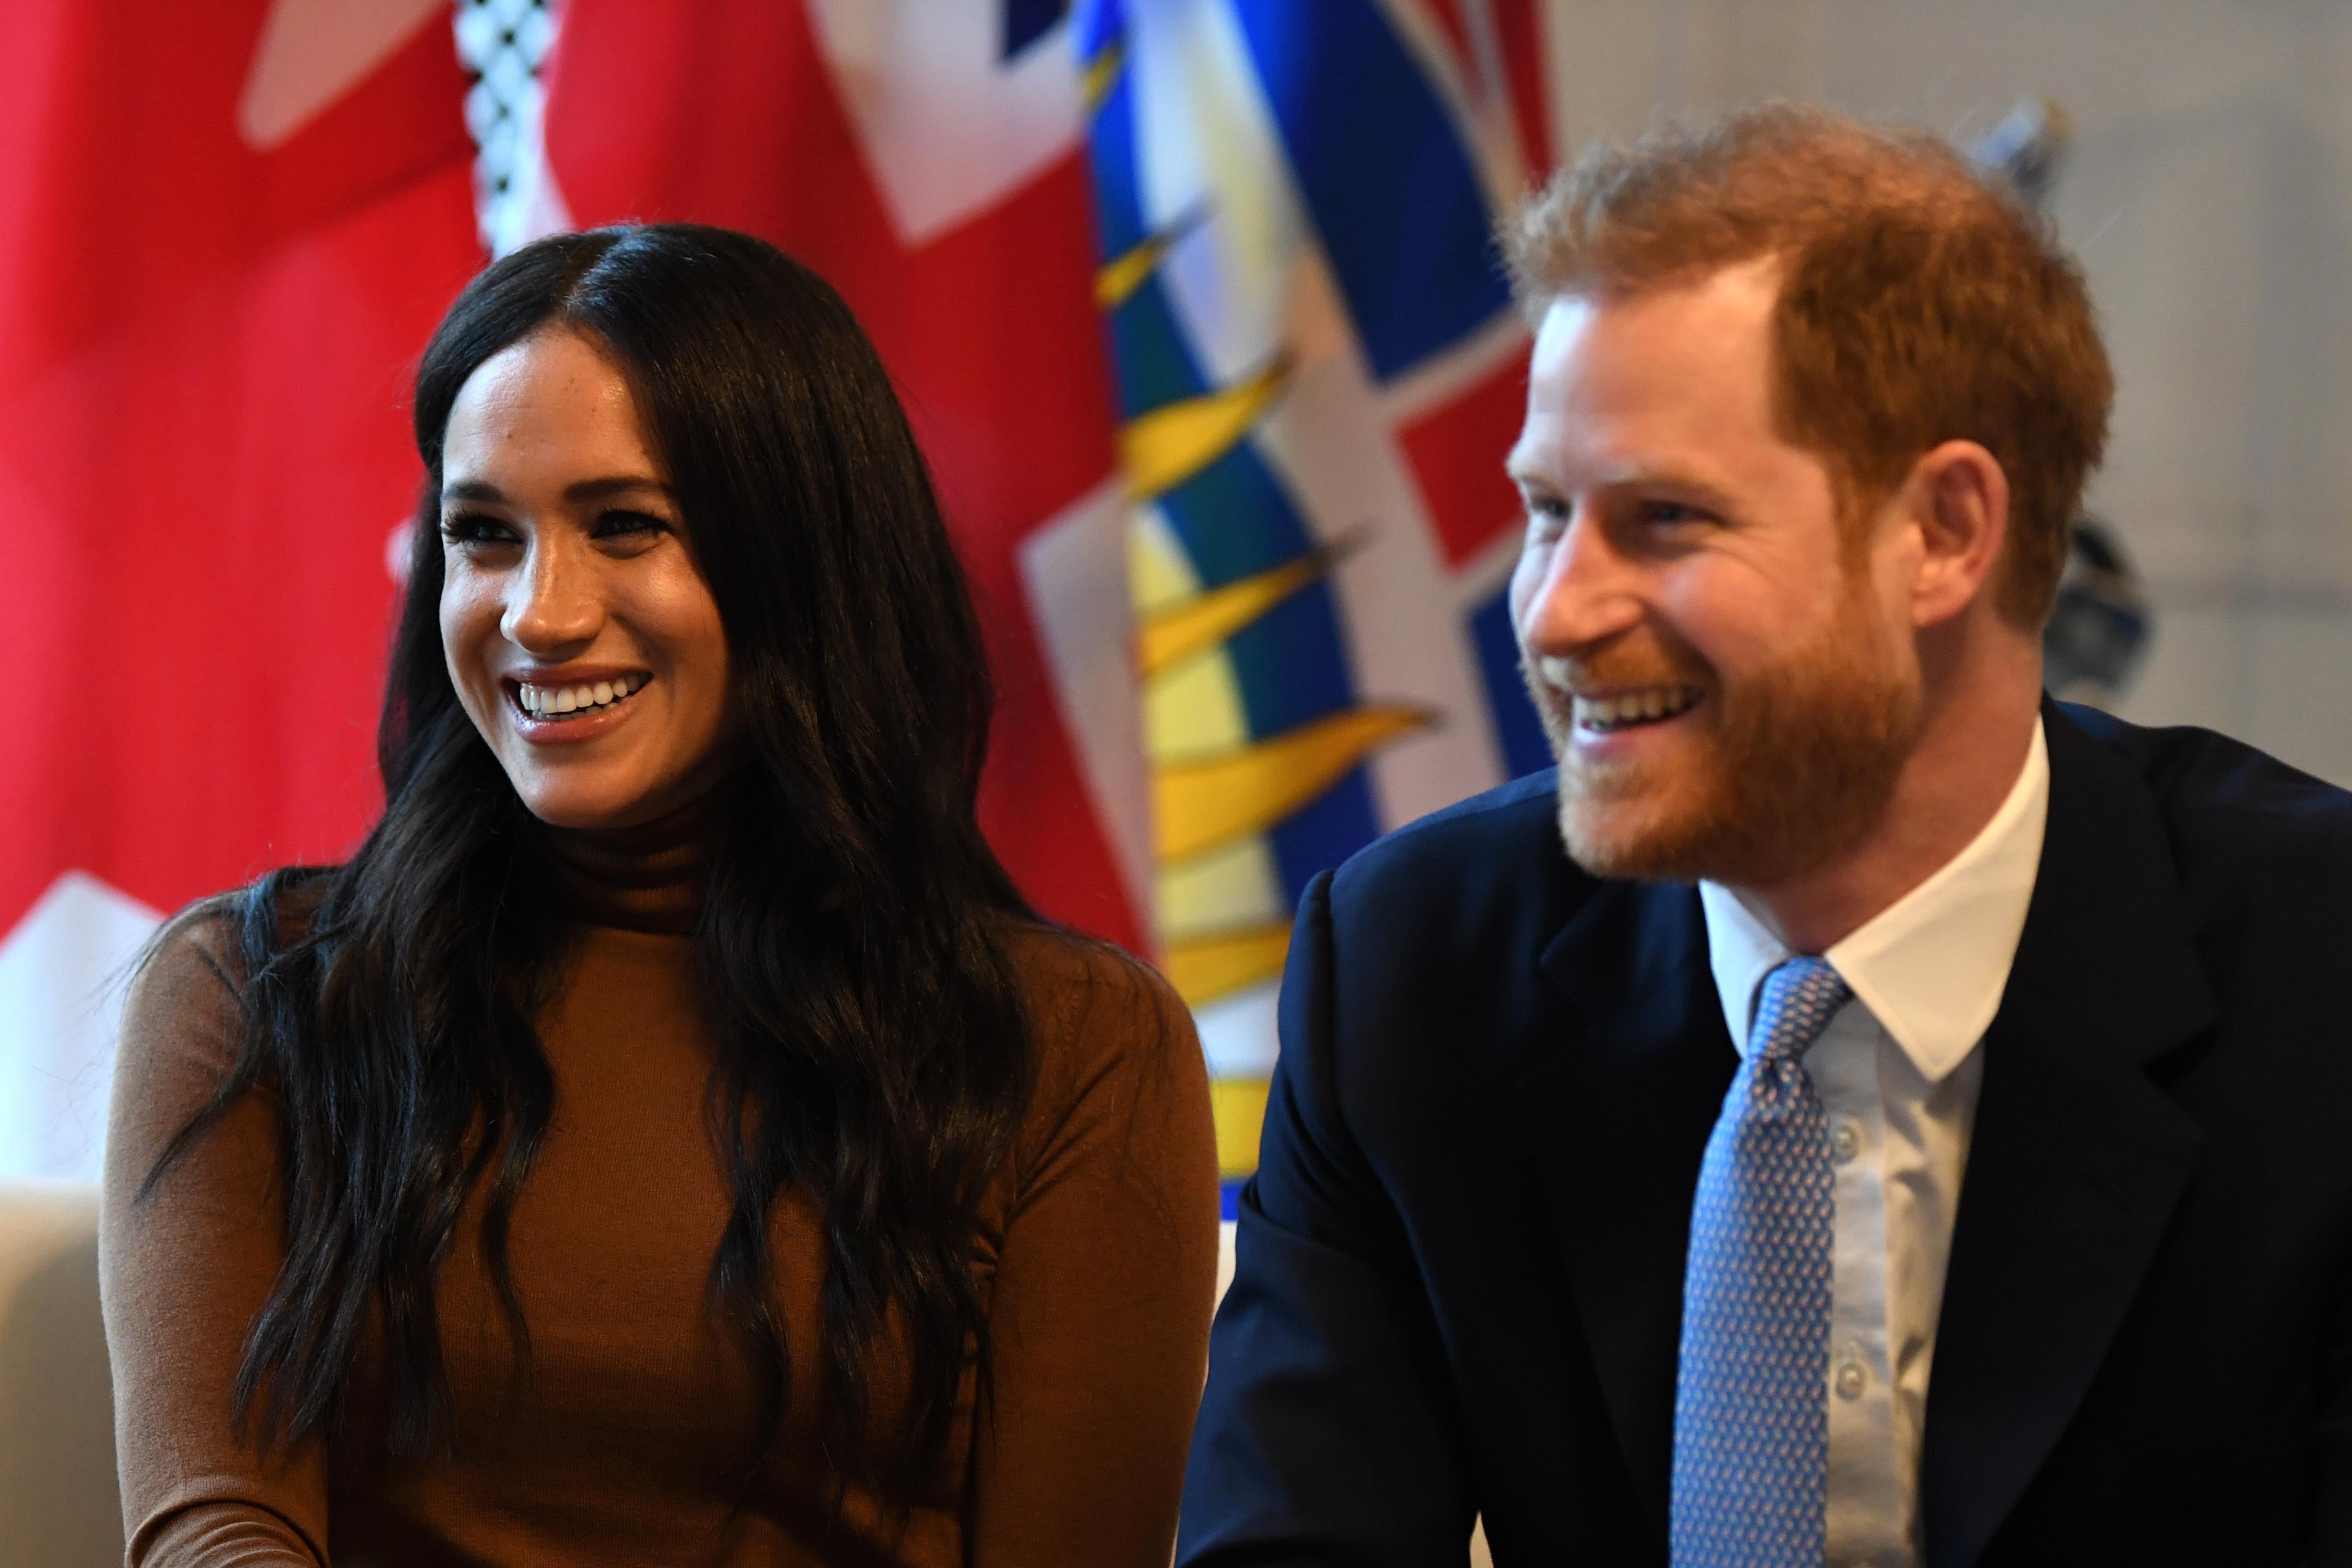 Prince Harry, wearing a navy blue suit, sits next to Meghan Markle, wearing a brown turtleneck. Both of them are smiling.